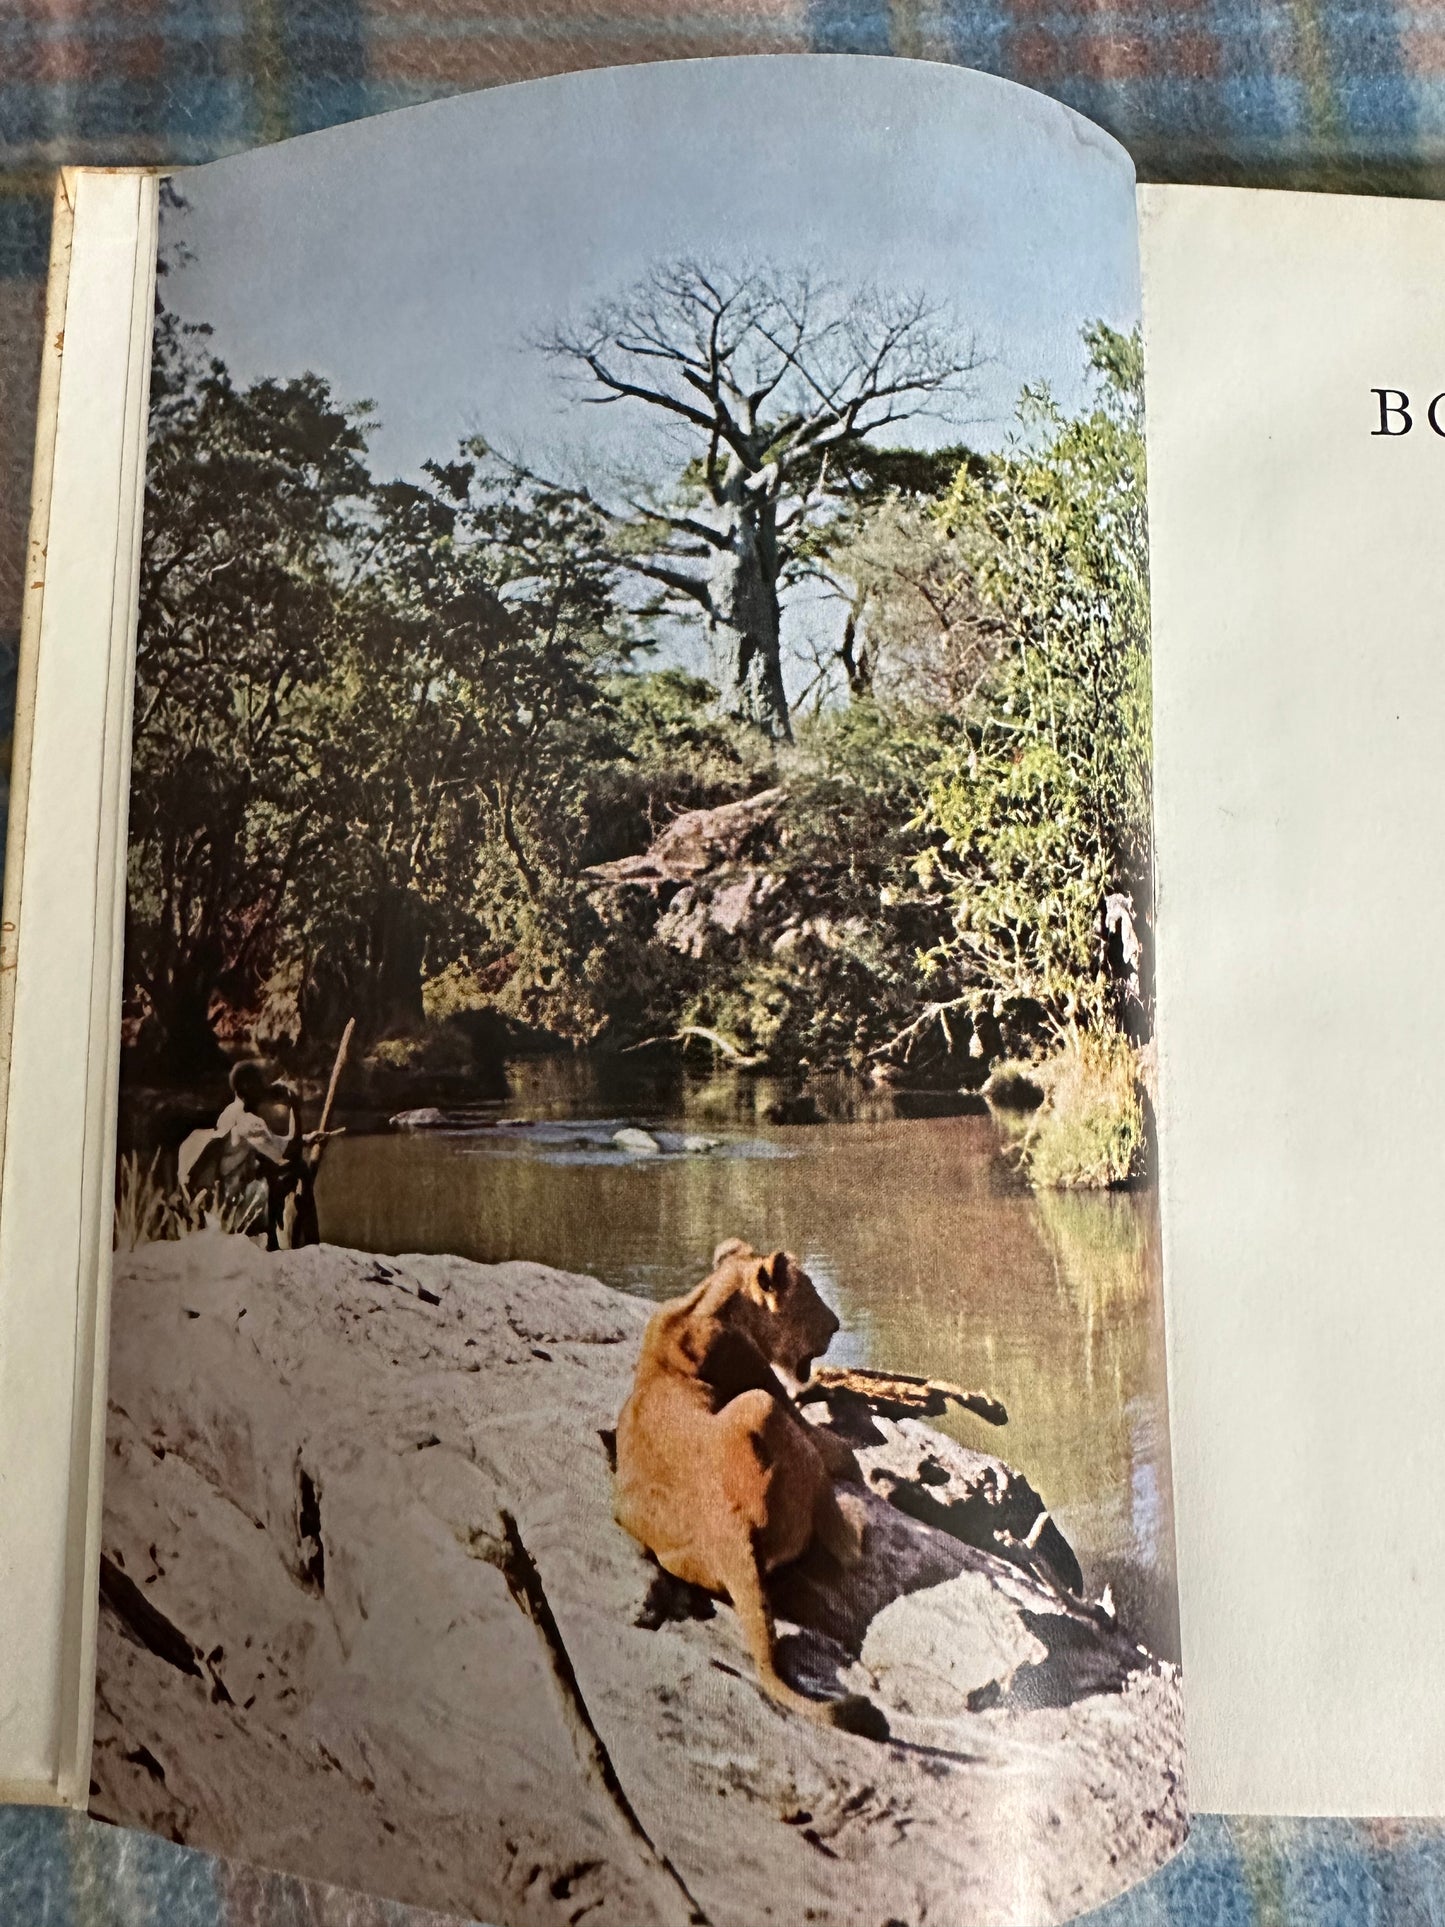 1960 Born Free(A Lioness of Two Worlds) Joy Adamson(Collins & Harvill Press)